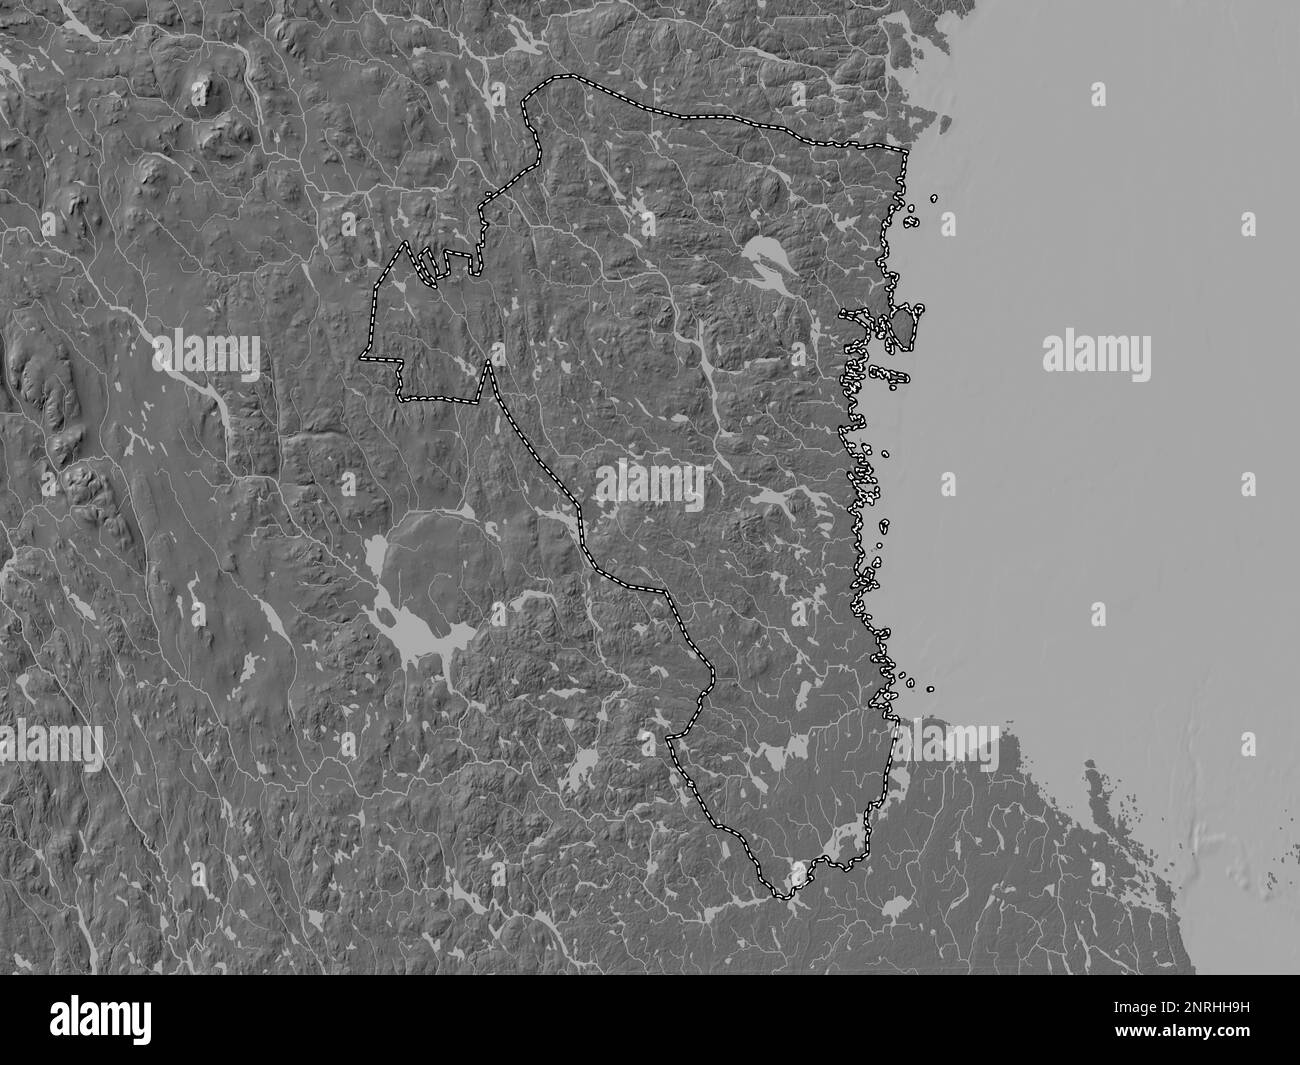 Gavleborg, county of Sweden. Bilevel elevation map with lakes and rivers Stock Photo